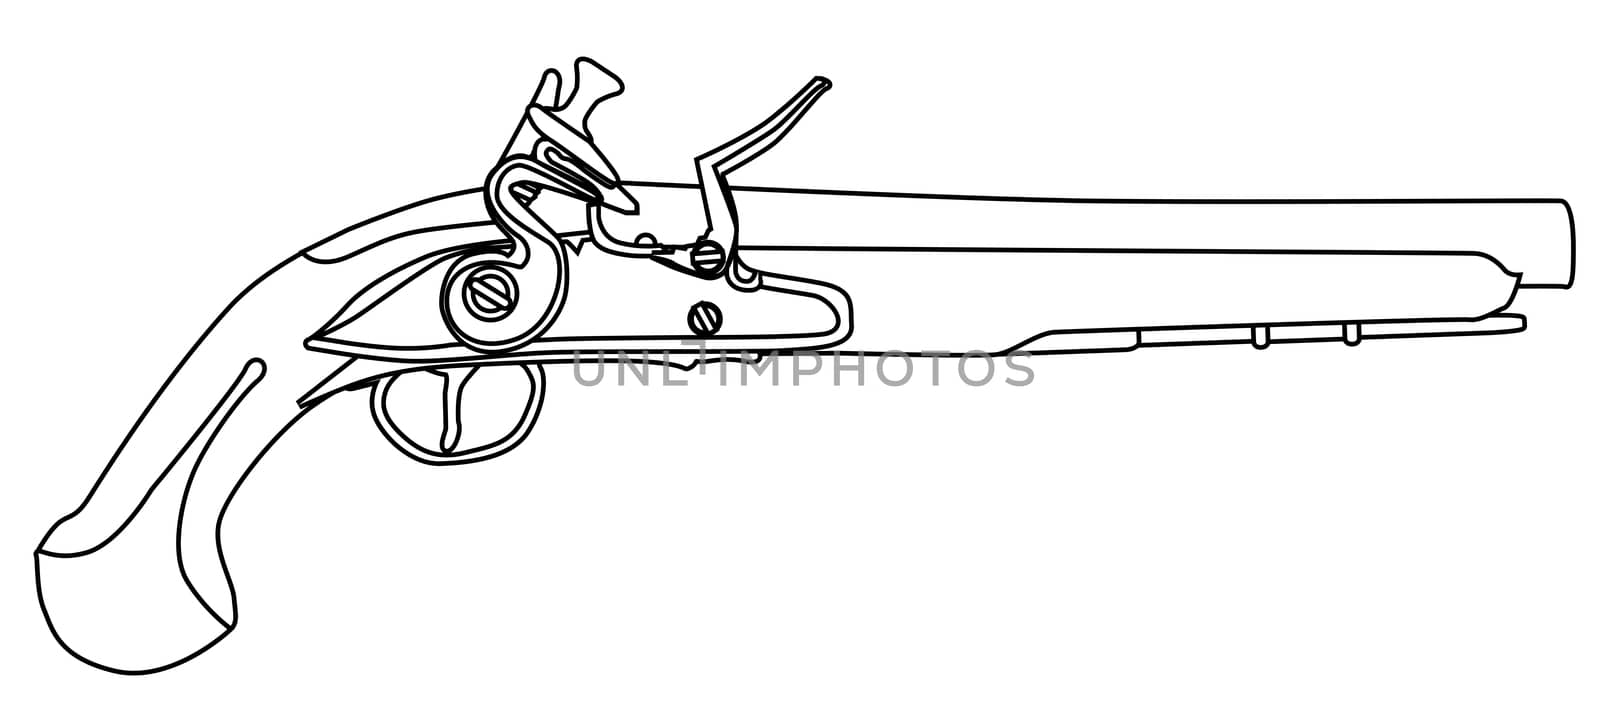 An of old style flintlock dueling pistol isolated on white.